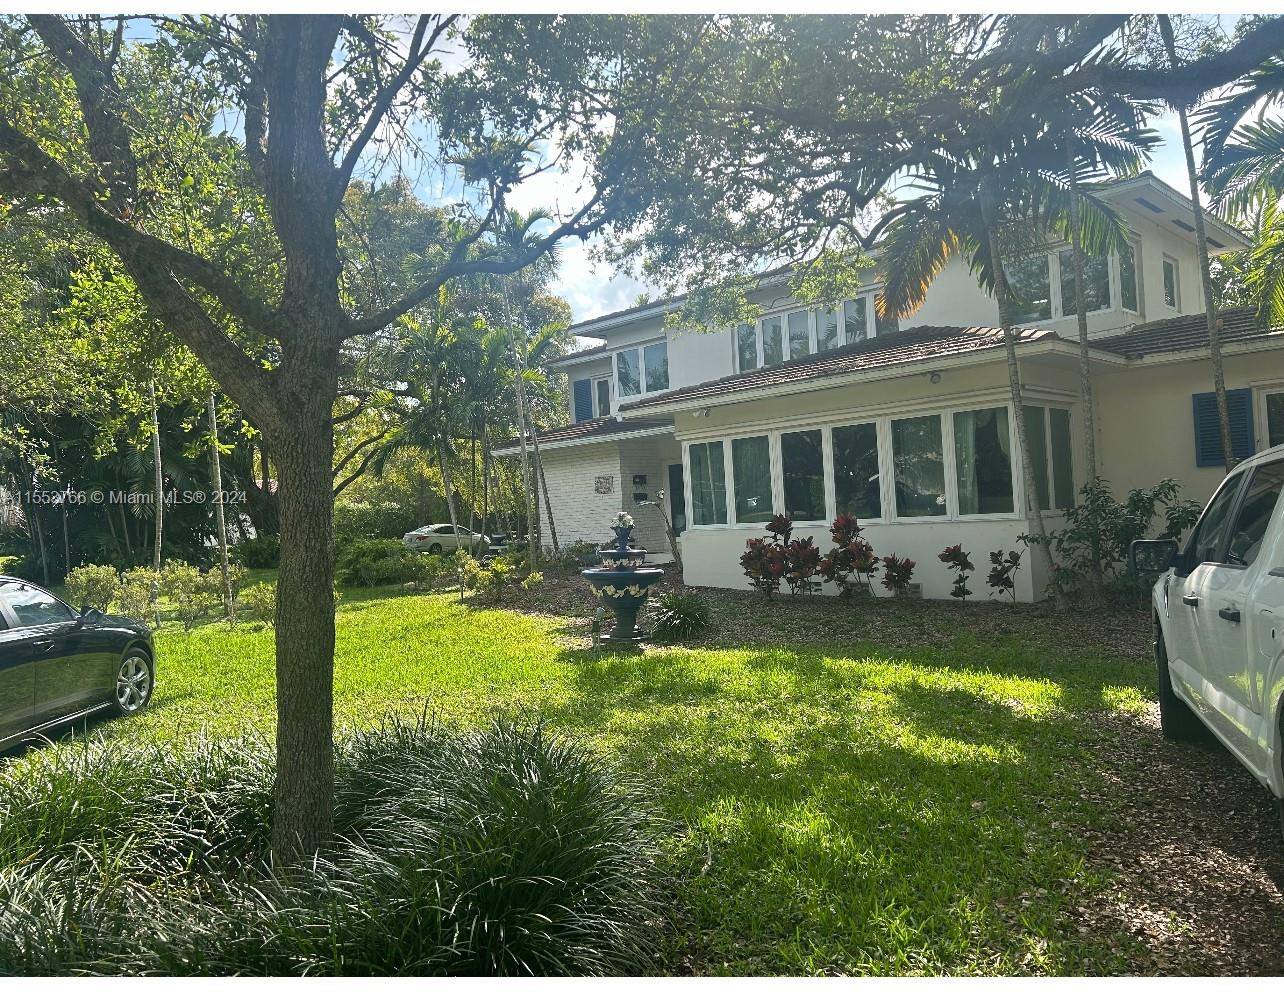 Nestled in the heart of Coral Gables. Stunning residence two story home, perfect for entertainment. This home offers harmonious blend with the nature, providing and exquisite experience in one of the most desirable neighborhoods of Coral Gables.